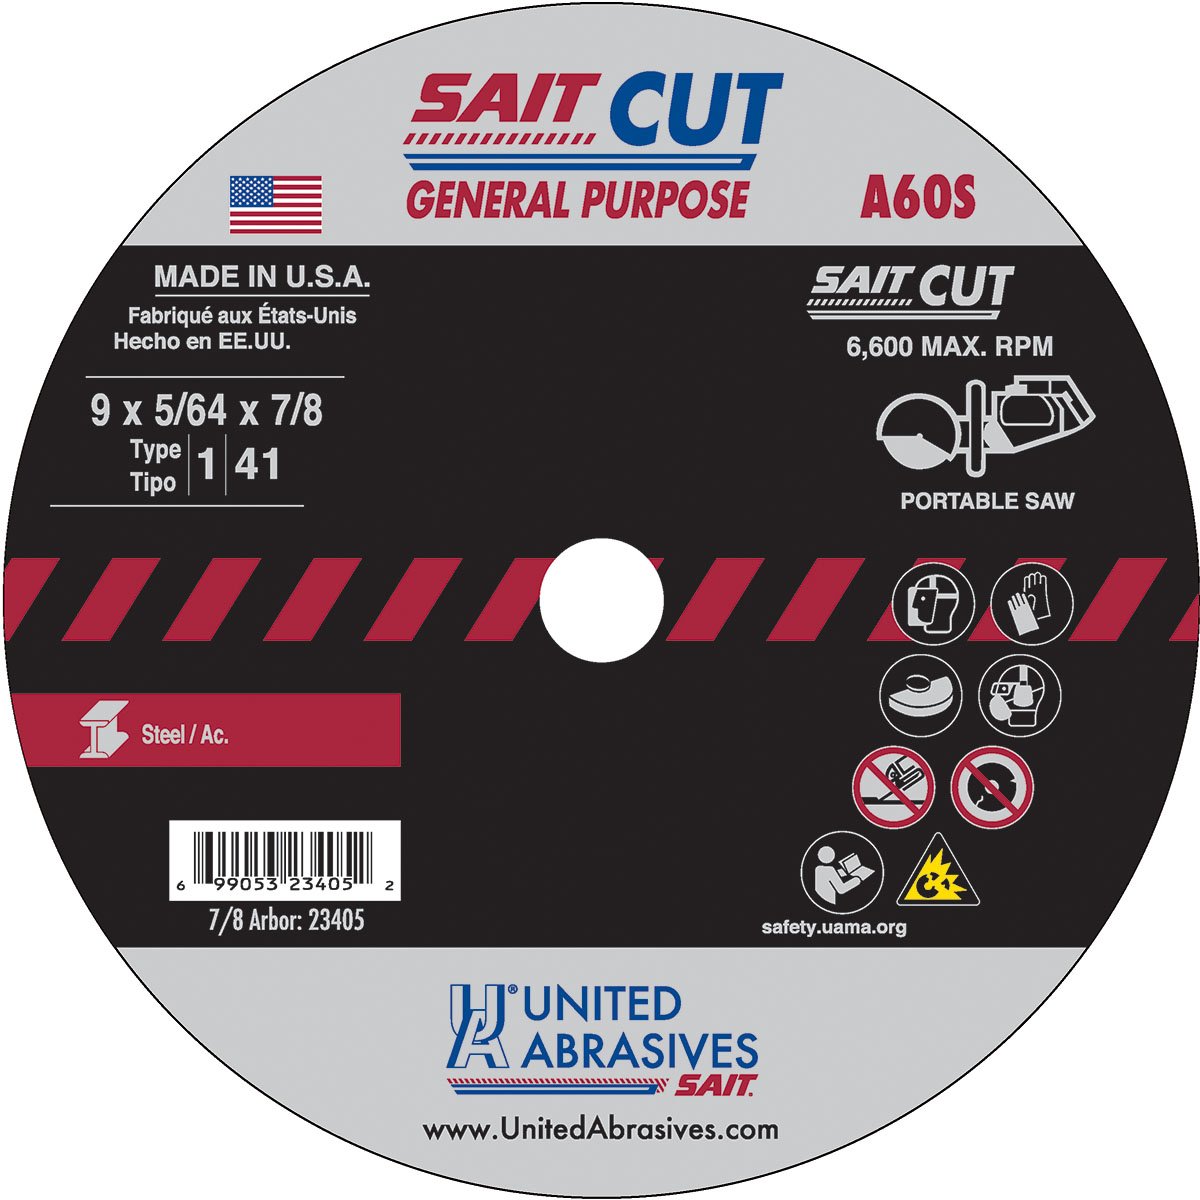 United Abrasives-Sait 23405 12in x 1/8in x 1in Abrasive Blade for Cutting Metal (Box of 10) Copy 23405